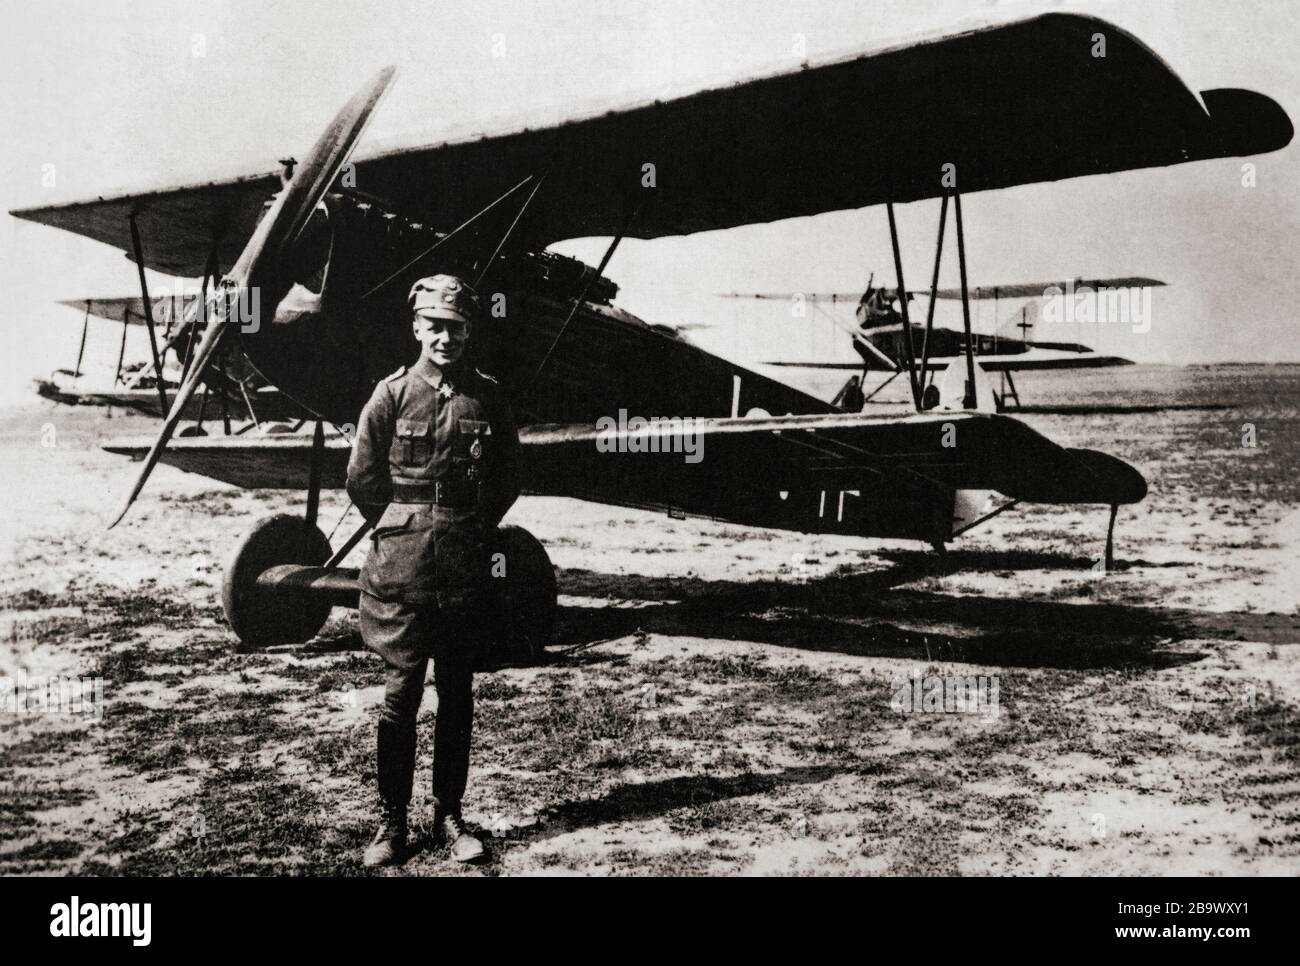 Ernst Udet (1896-1941), in front of his Fokker D VII. Udet joined the Imperial German Air Service at age 19, eventually becoming a notable flying ace of World War I, scoring 62 confirmed victories by the end of his life. Stock Photo